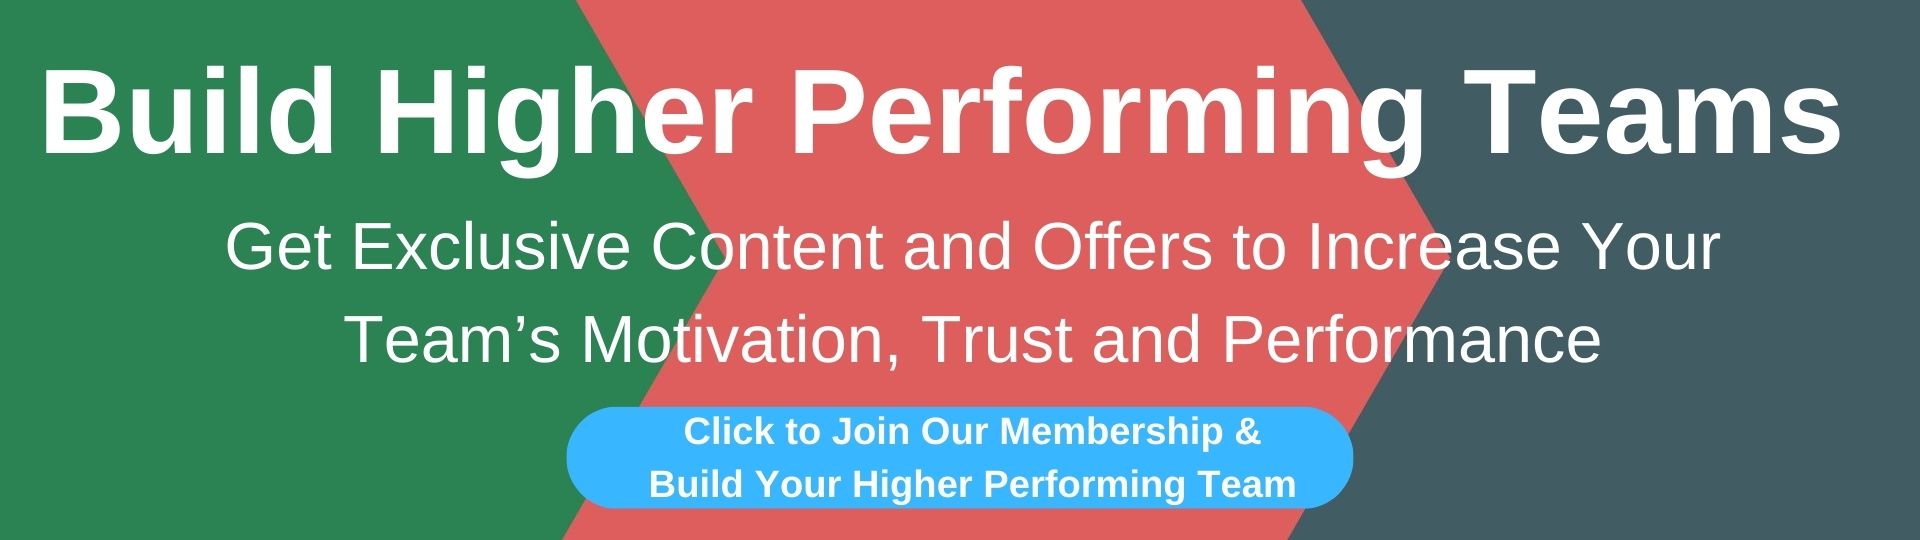 Team Performance - email membership sign up WELM-002